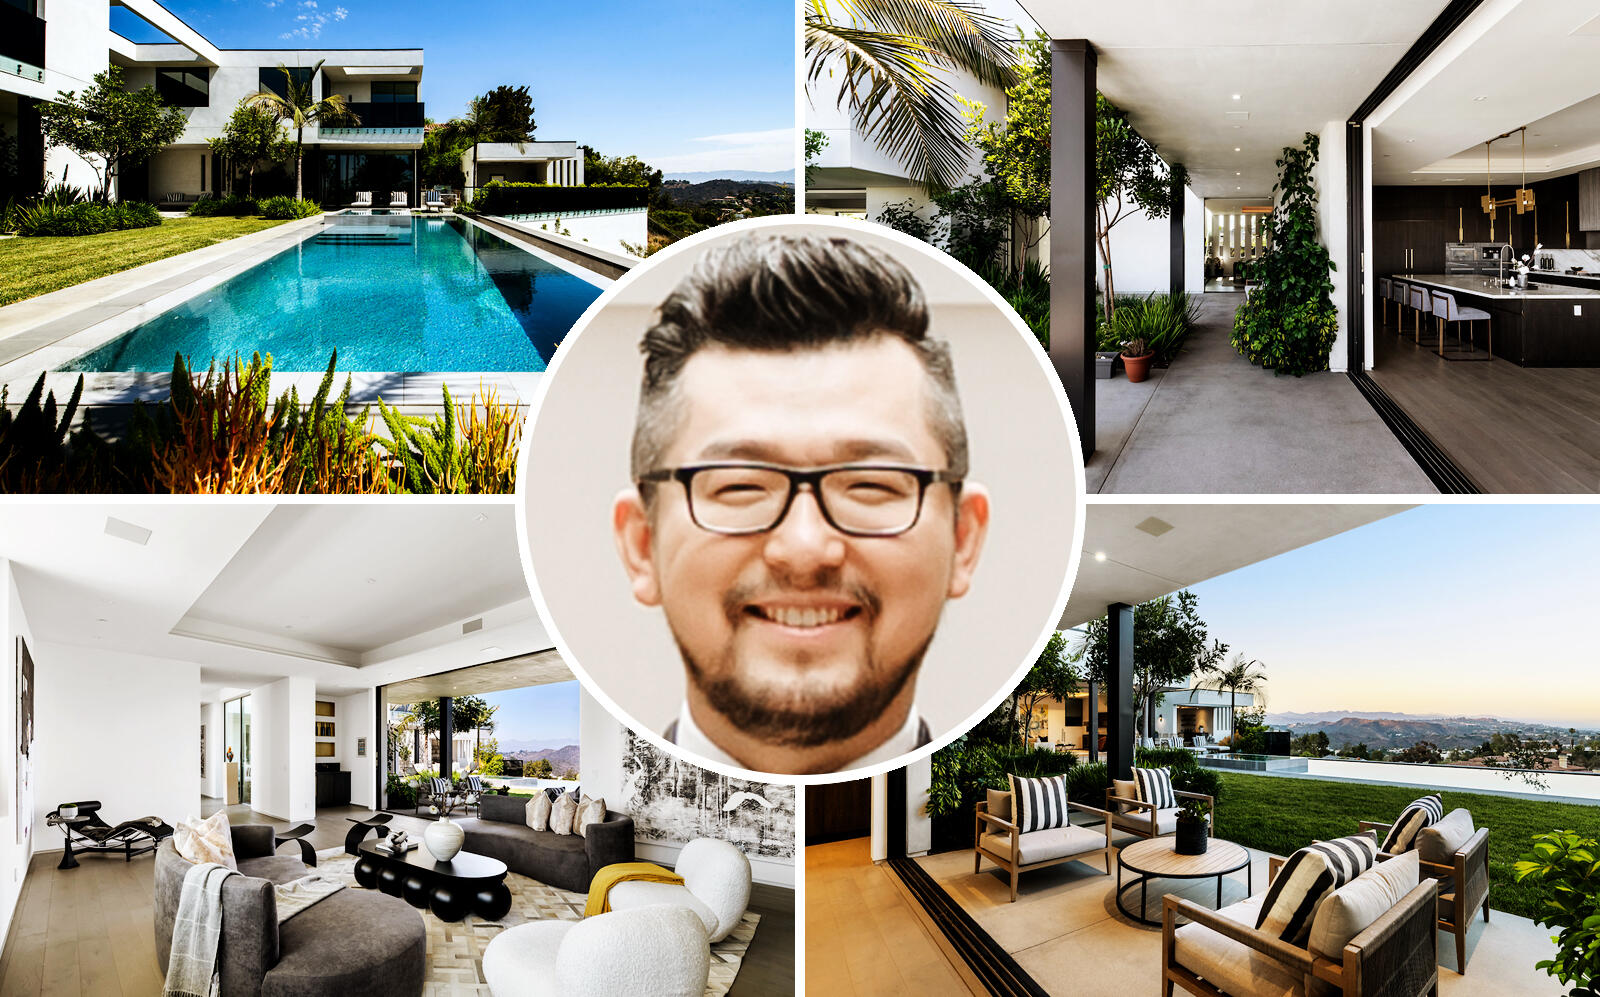 Cryptocurrency star Wen Hou shells out $9.7M for Bel Air spec home